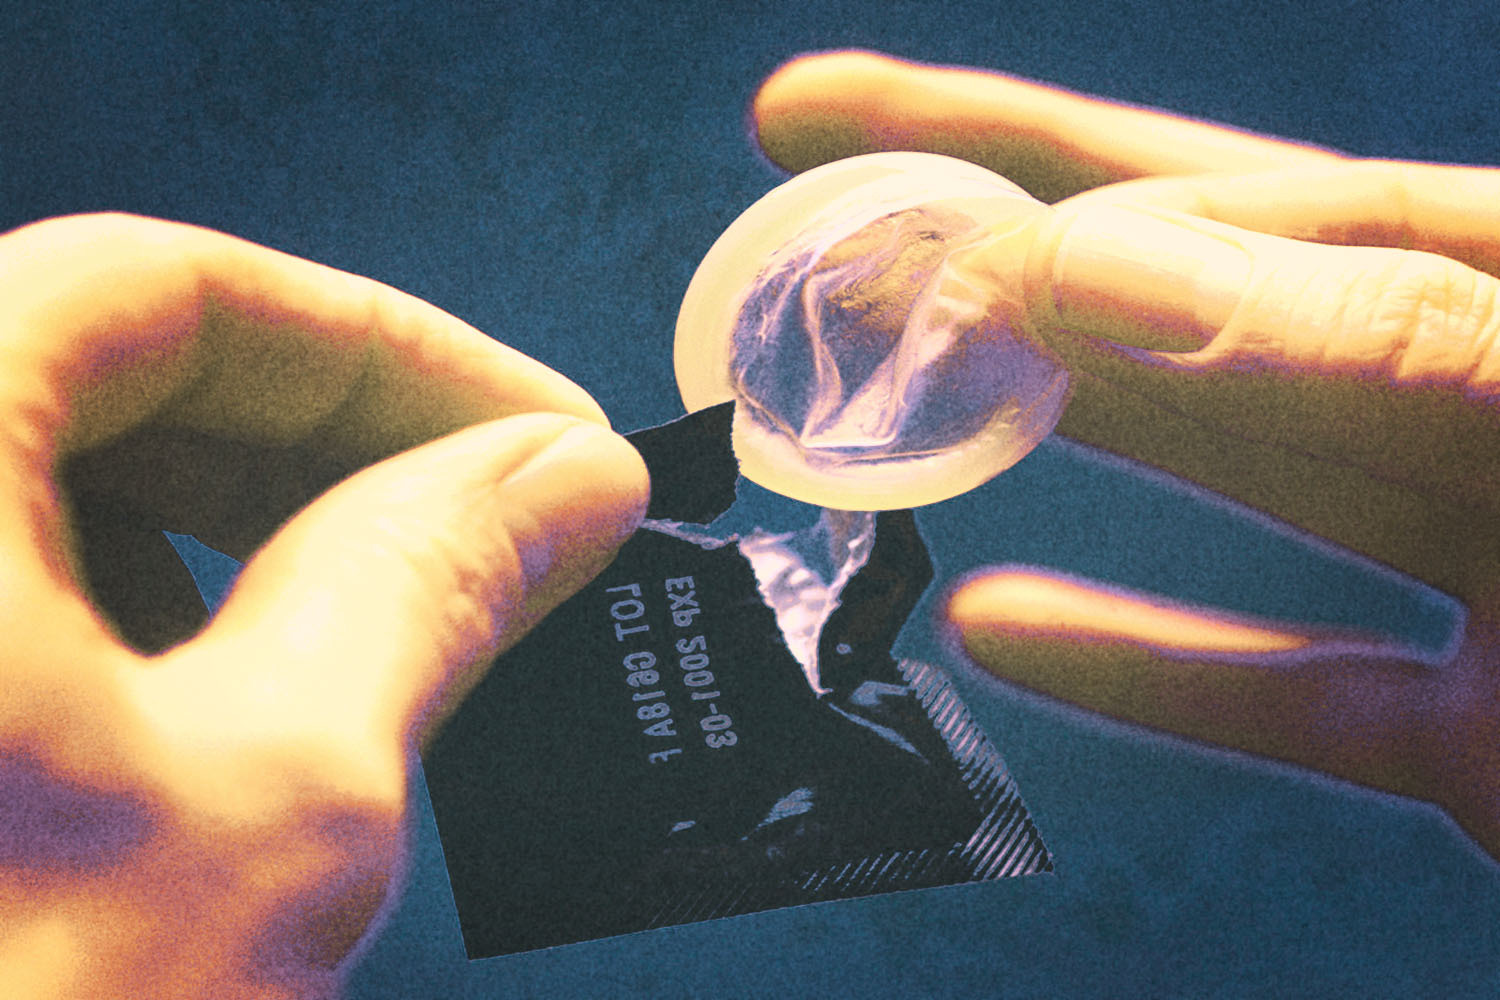 Close-up photo shows man taking condom out of wrapper